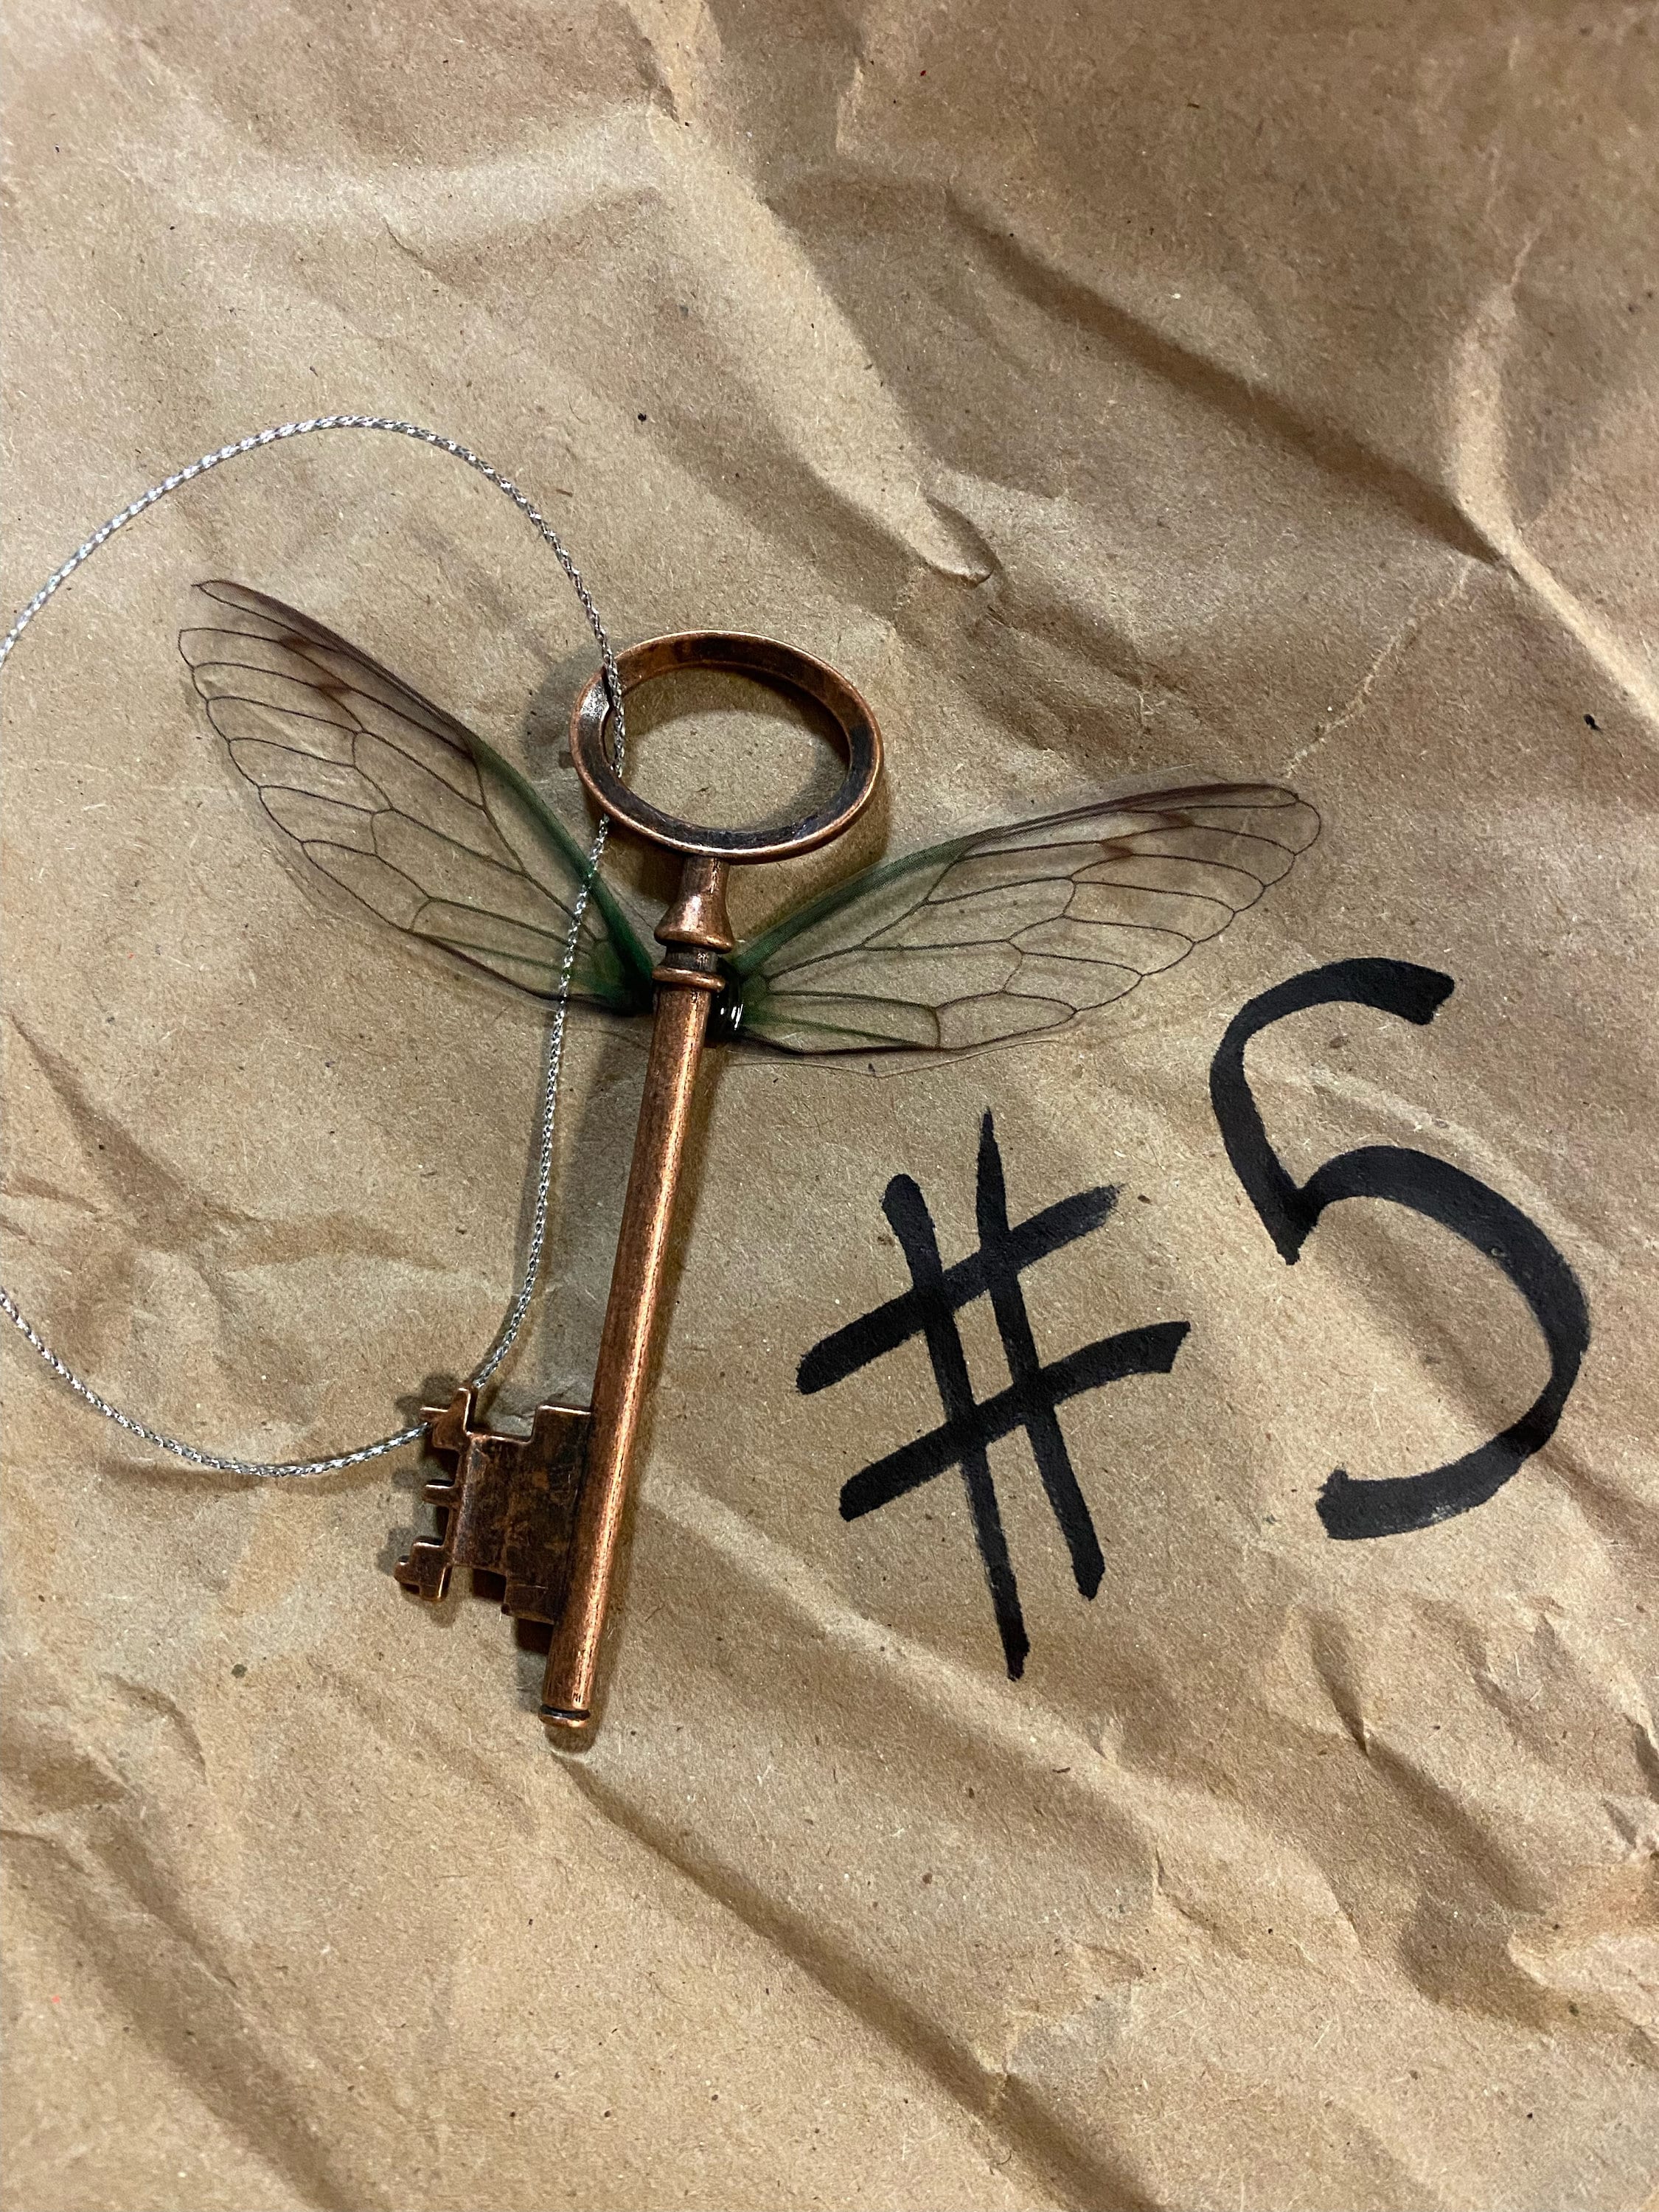 Flying Key Ornament Inspired by Harry Potter With Howler Envelope